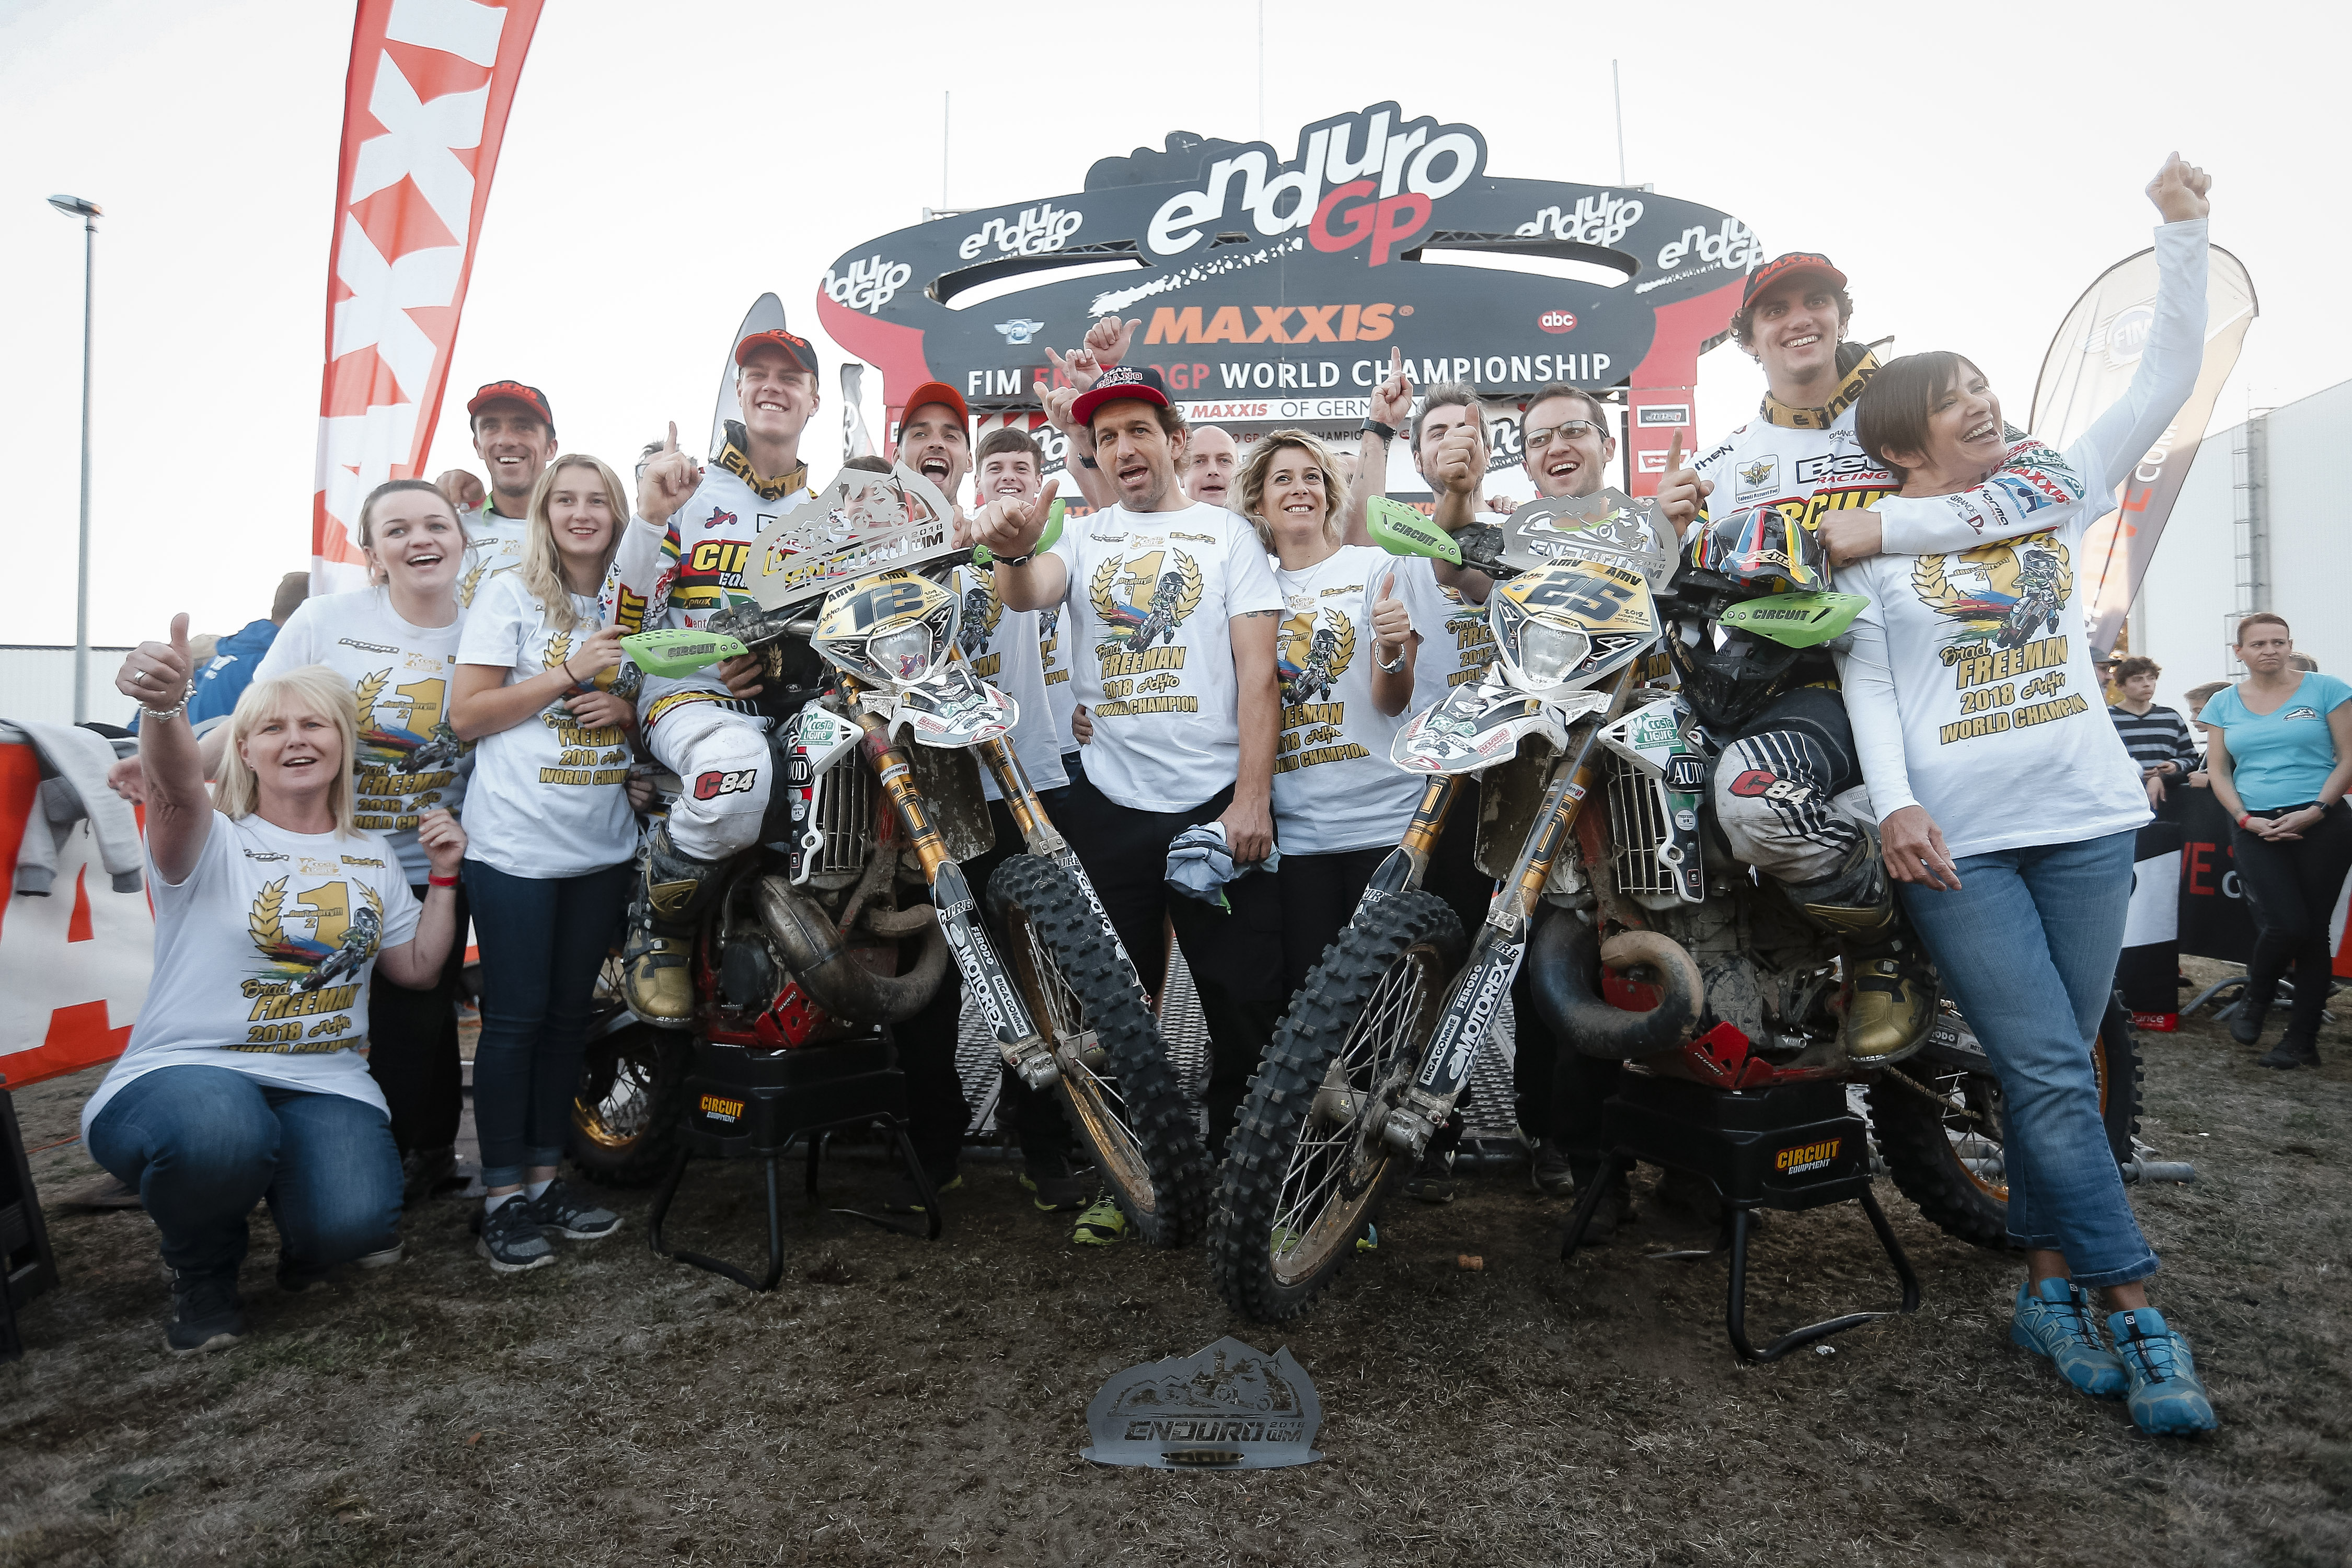 JOY FOR FREEMAN AND MAXXIS AFTER ENDURO GP VICTORY